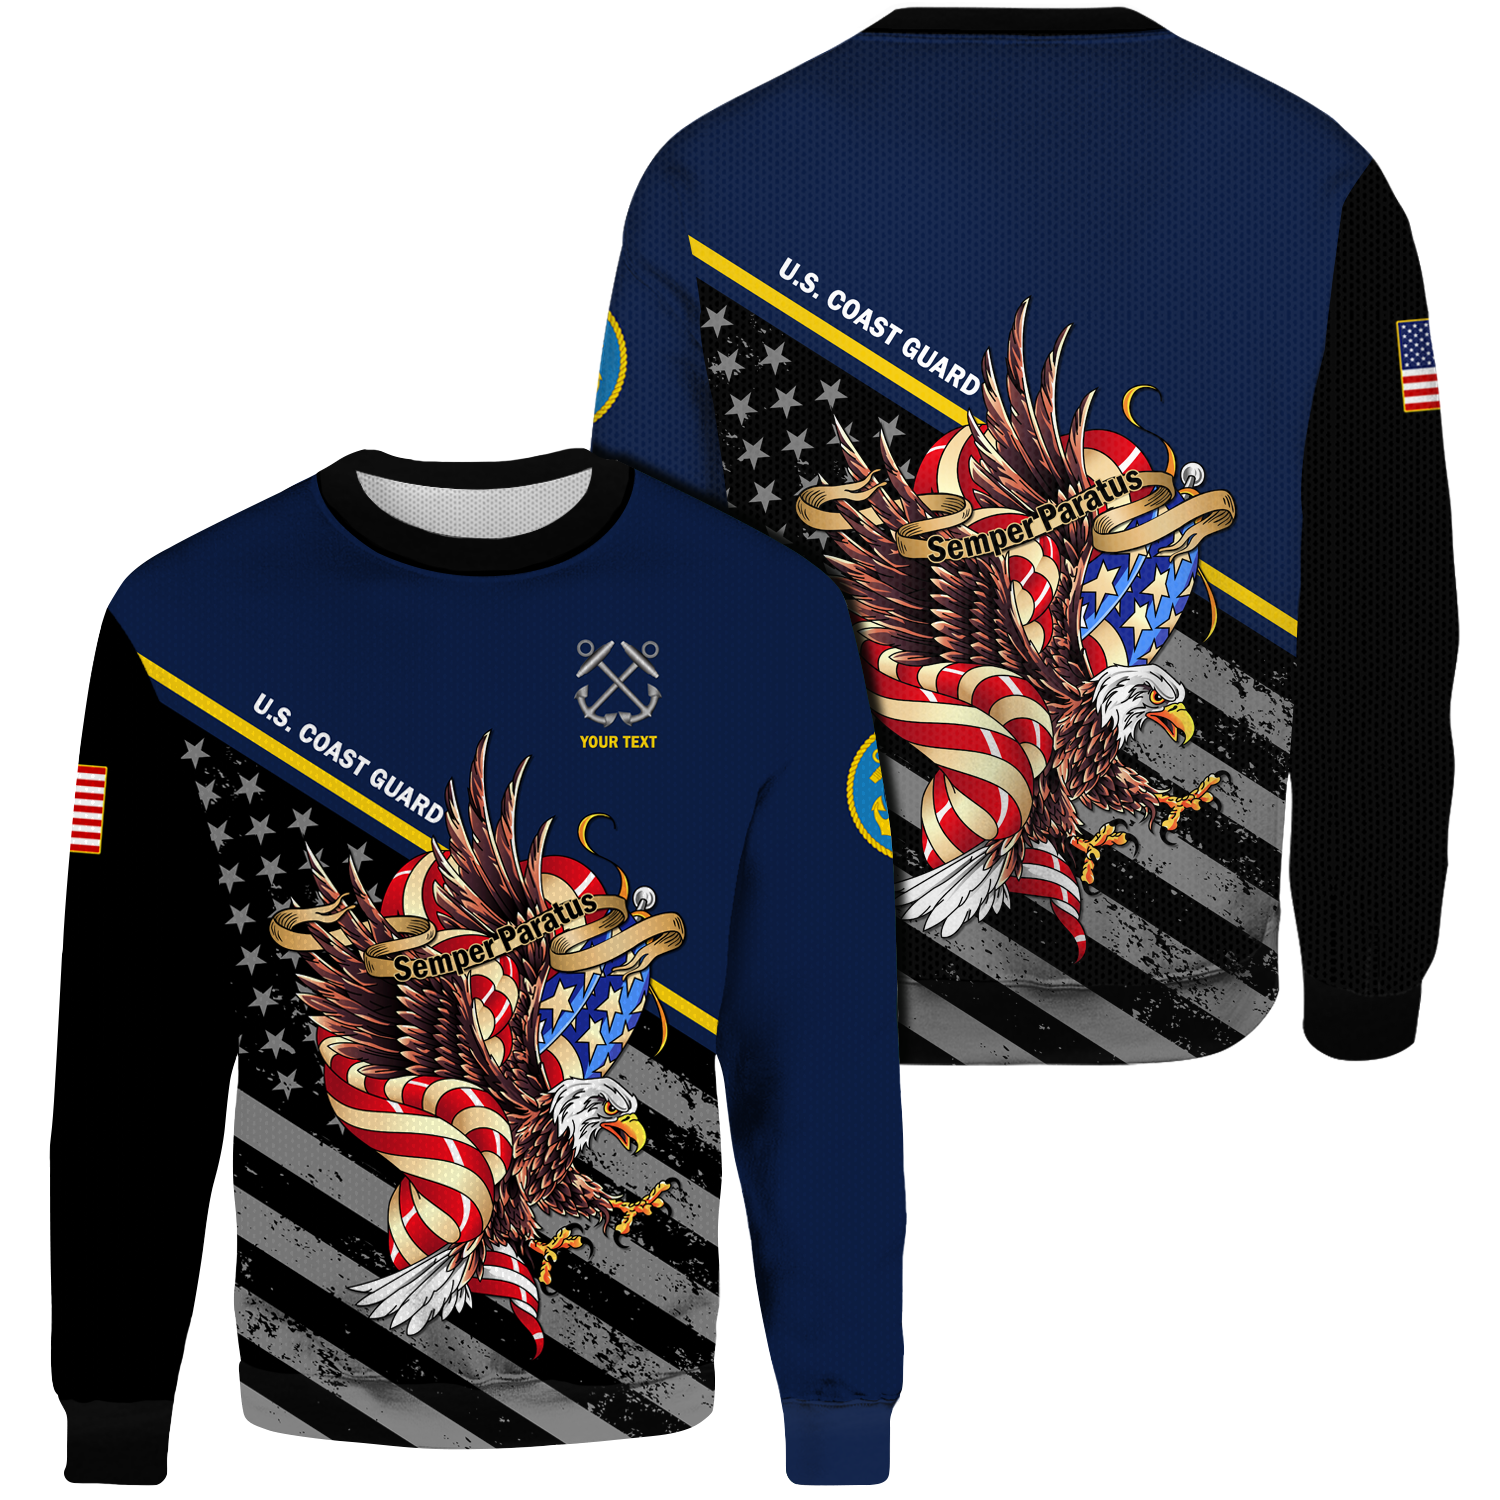 Custom 3D All Over Prints Ugly Sweater, Personalized Name And Ranks, Military Motto